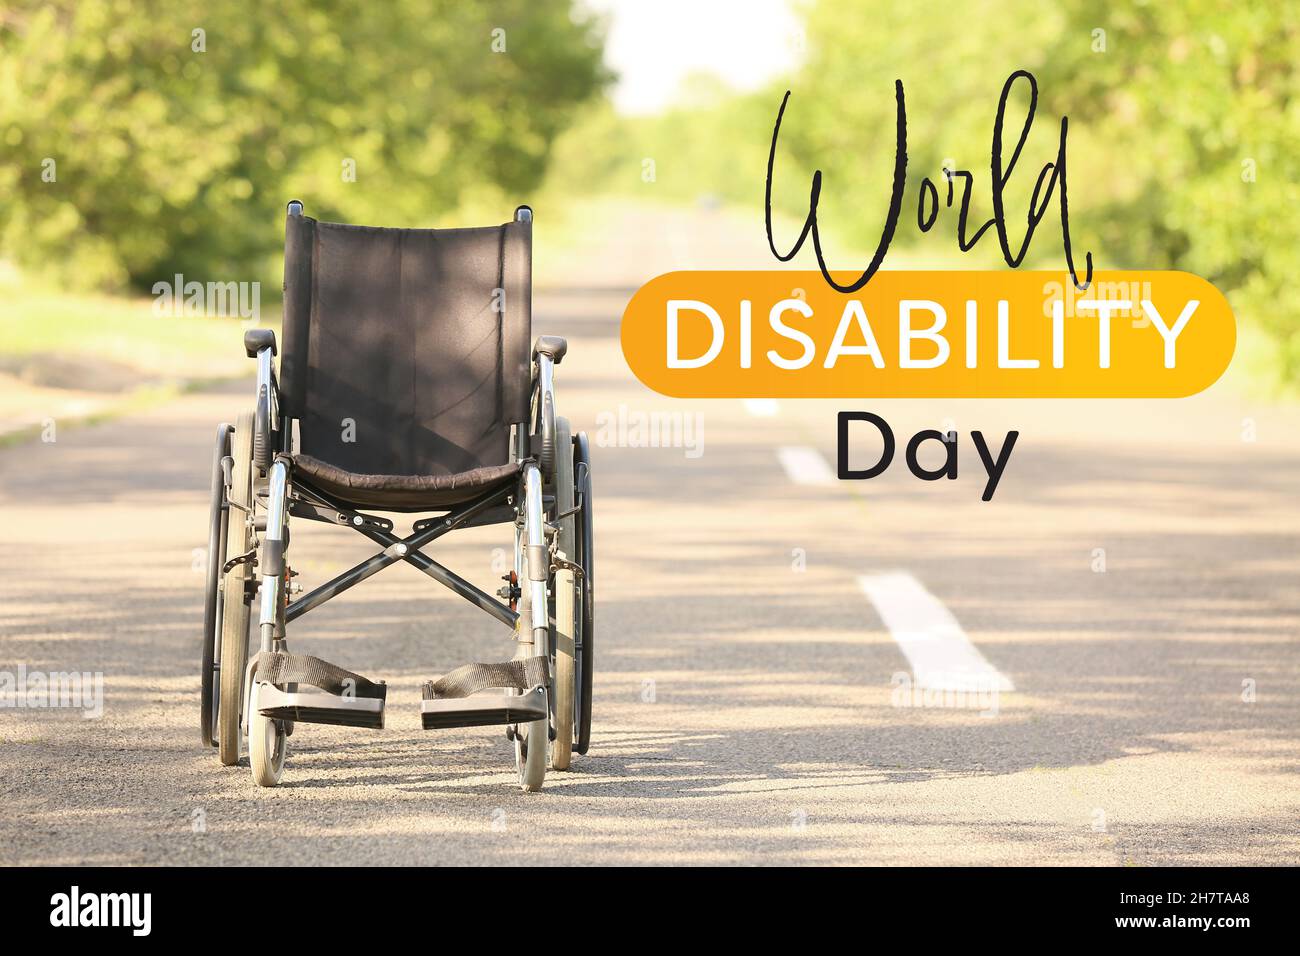 Empty wheelchair on road outdoors. International Day of Persons with Disabilities Stock Photo